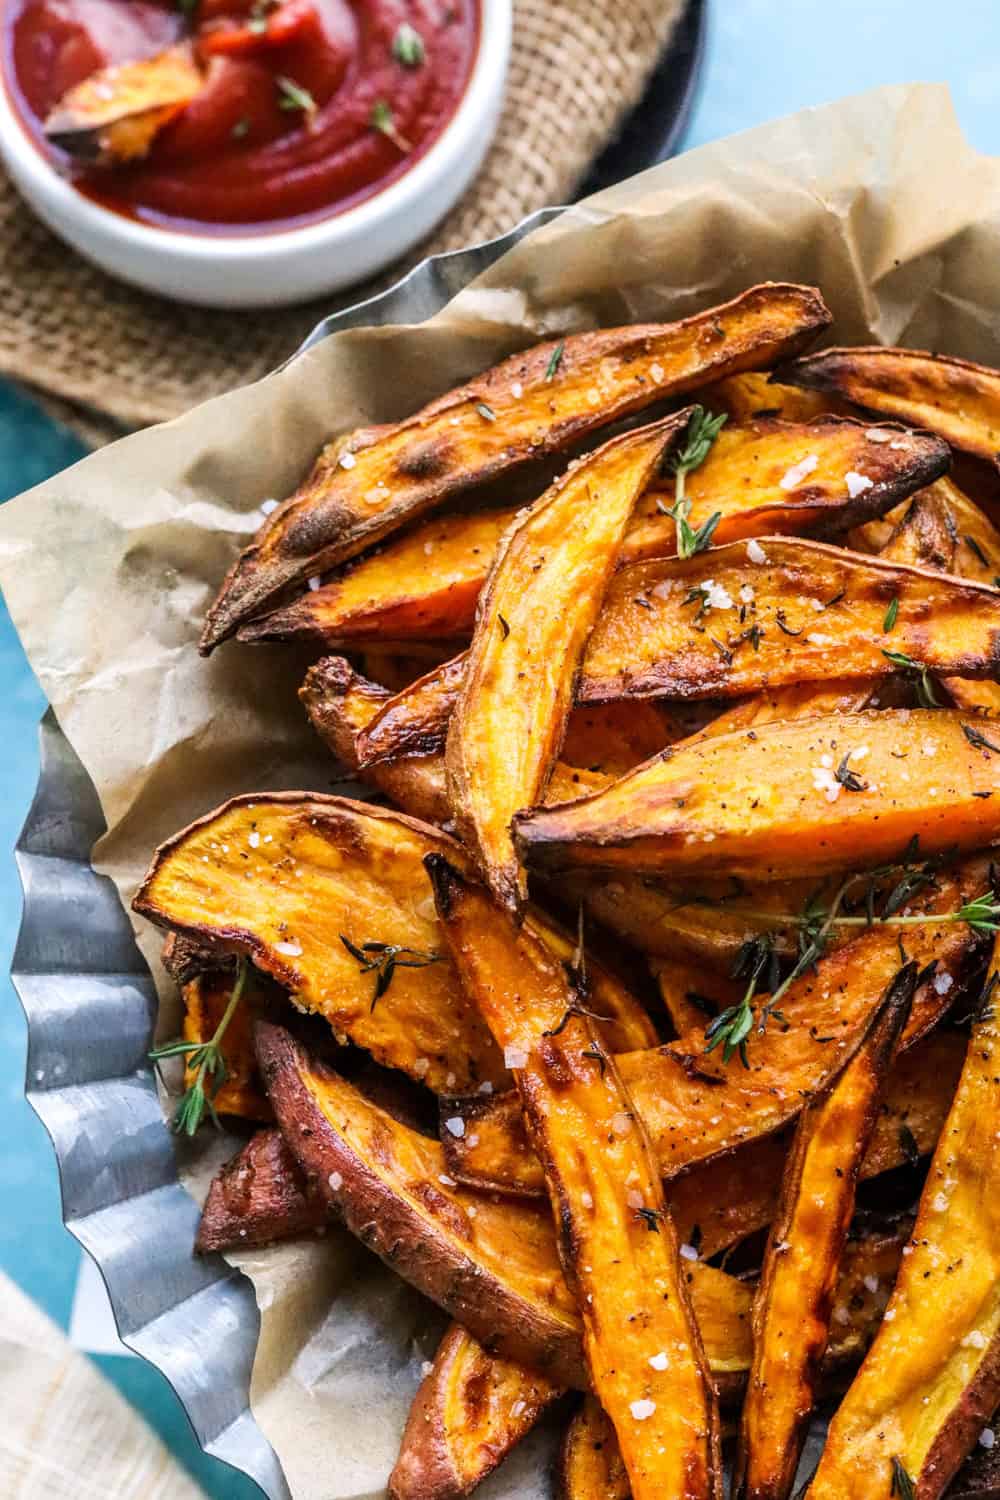 Golden brown sweet potato wedges in a basket on top of brown paper